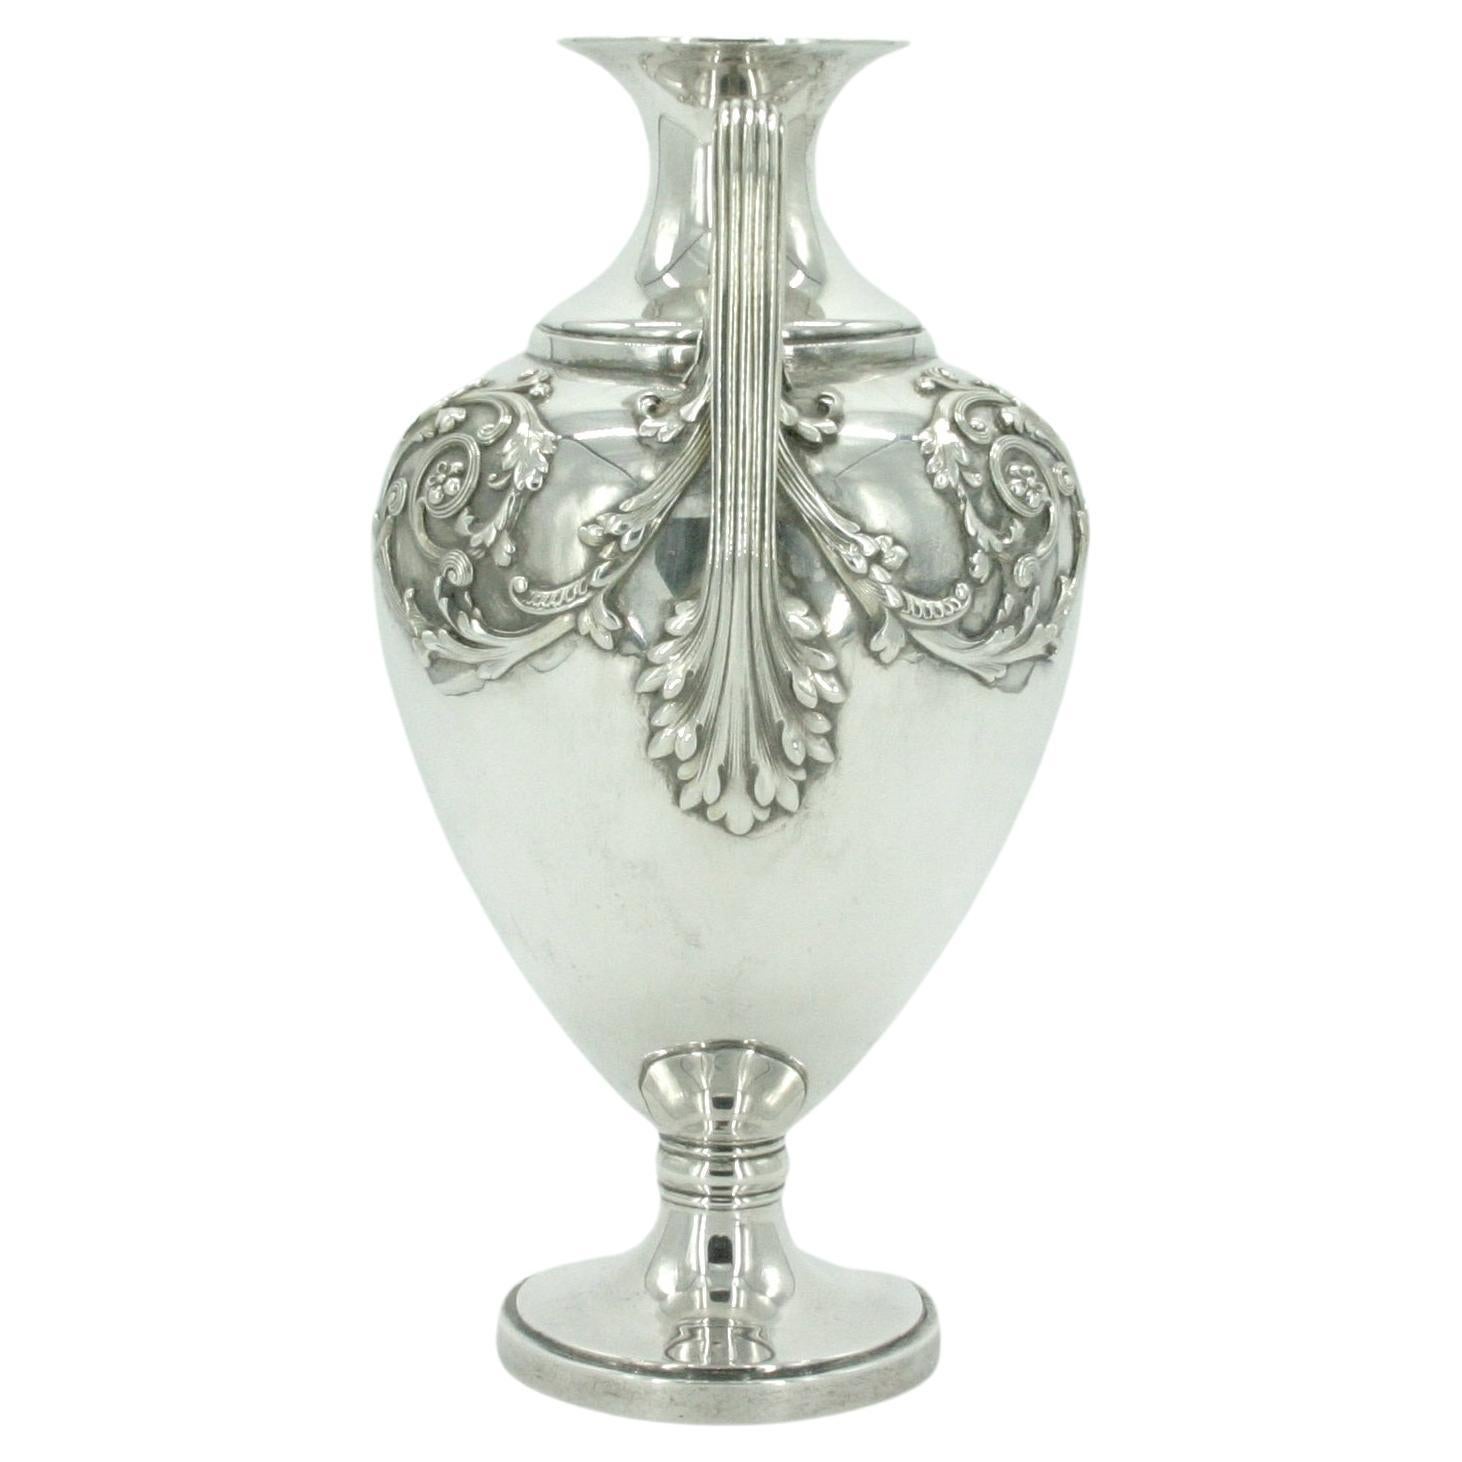 19th Century Tiffany & Co. sterling silver decorative footed vase / piece. The vase features exterior floral design with two side handles resting on a proportions round base. The vase is in great condition. Minor wear. Marked 